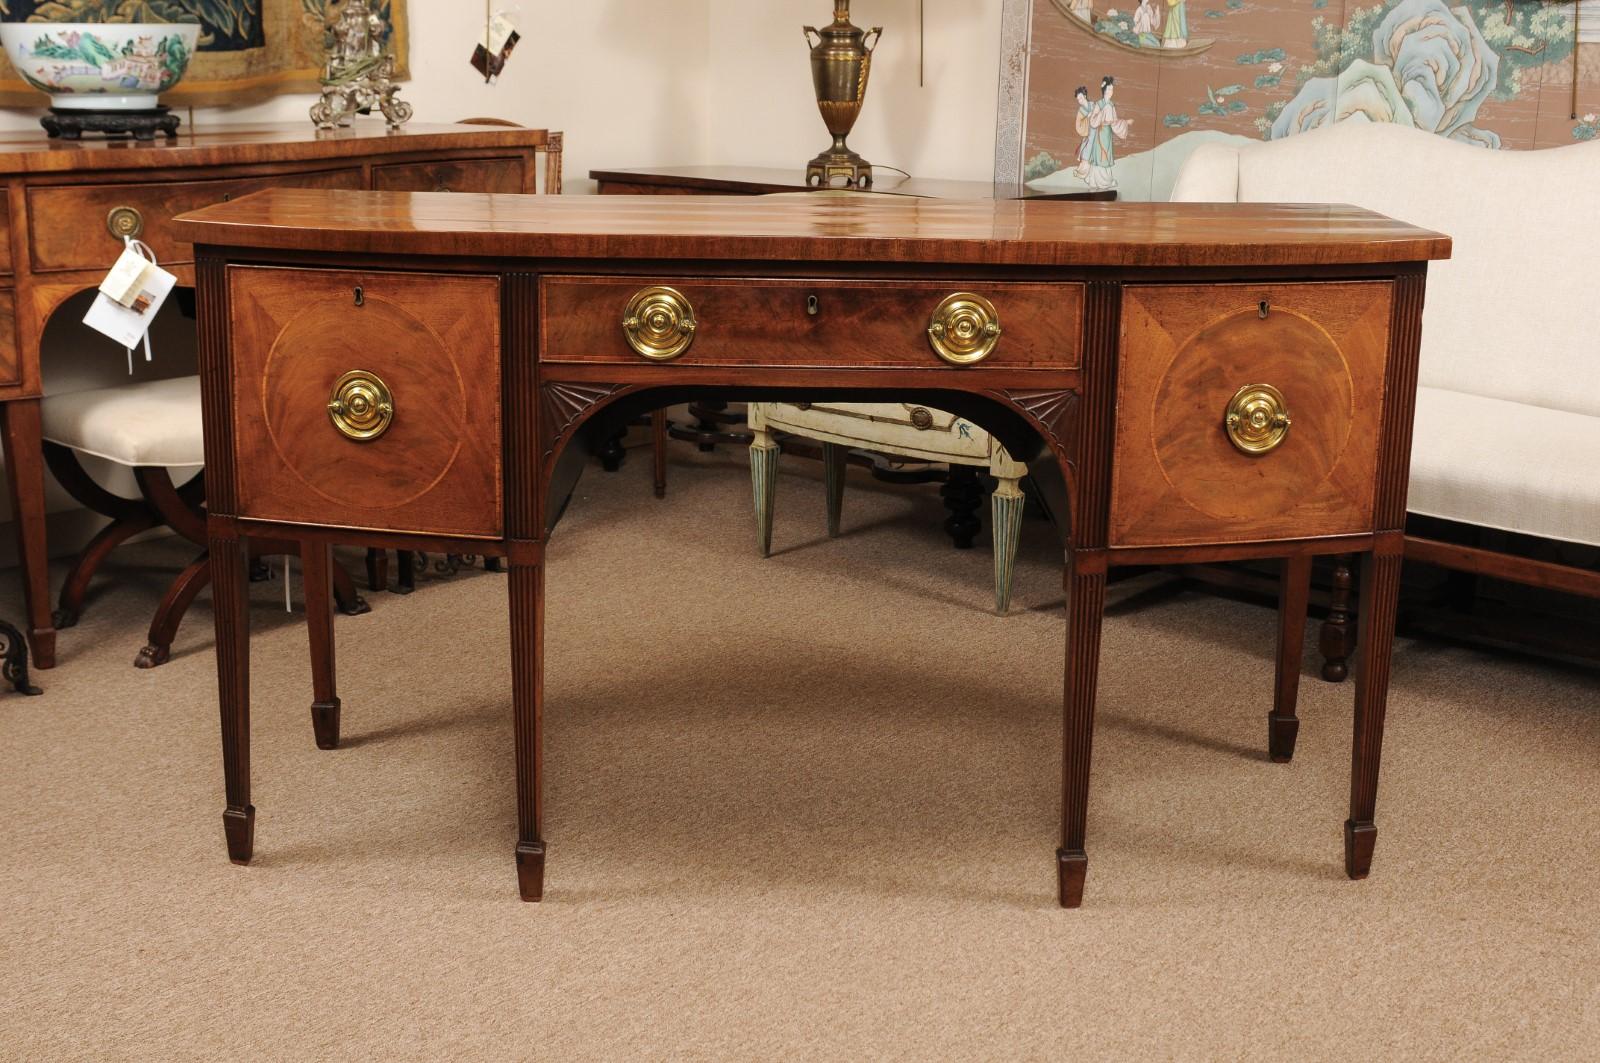 An early 19th century George III English mahogany bow-front sideboard featuring rosewood crossbanding and string boxwood inlay on drawers, fan carved brackets below ending on reeded legs and spade feet.

     